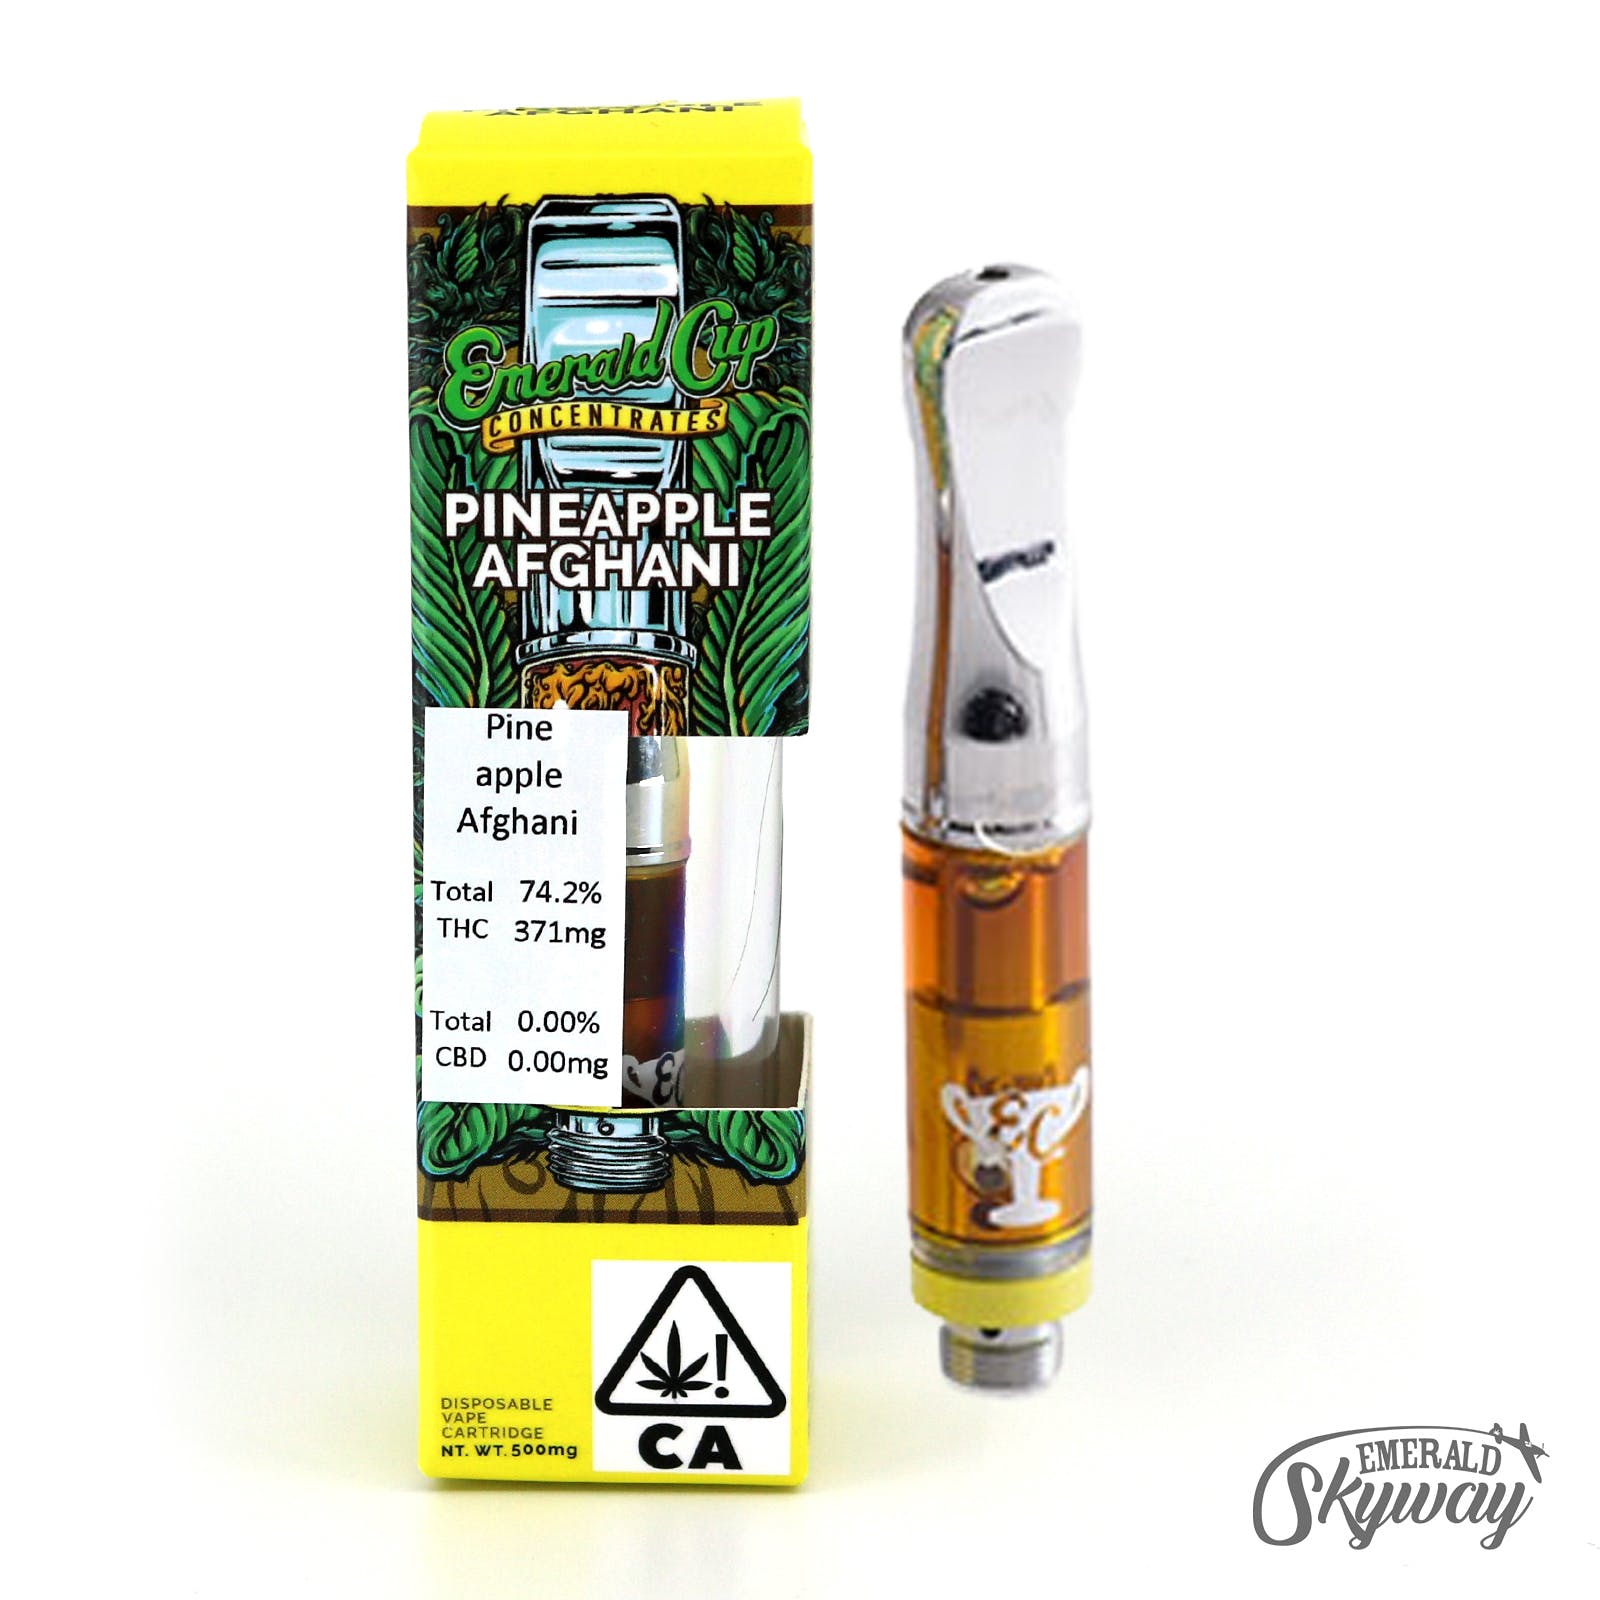 AbsoluteXtracts: Pineapple Afghani Cartridge